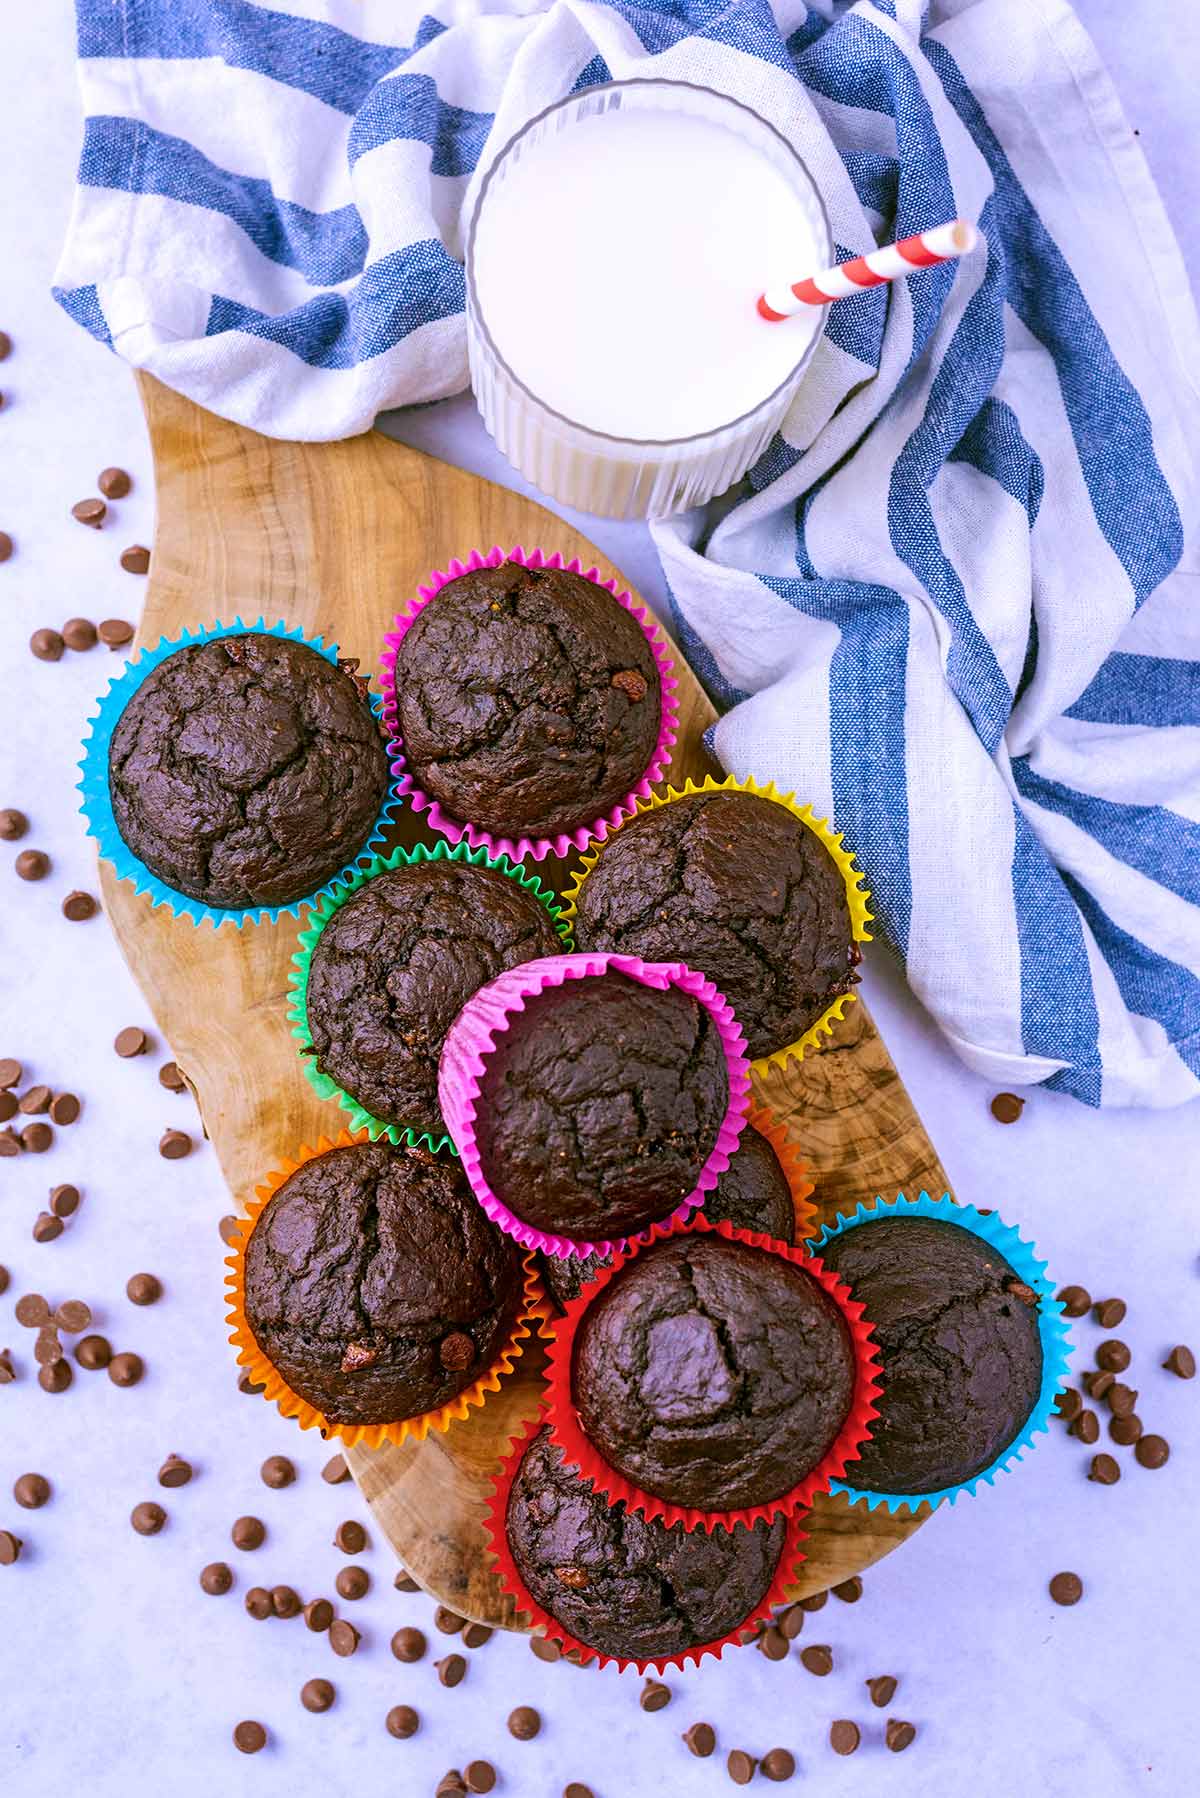 Eight chocolate muffins on a wooden serving board next to a glass of milk.